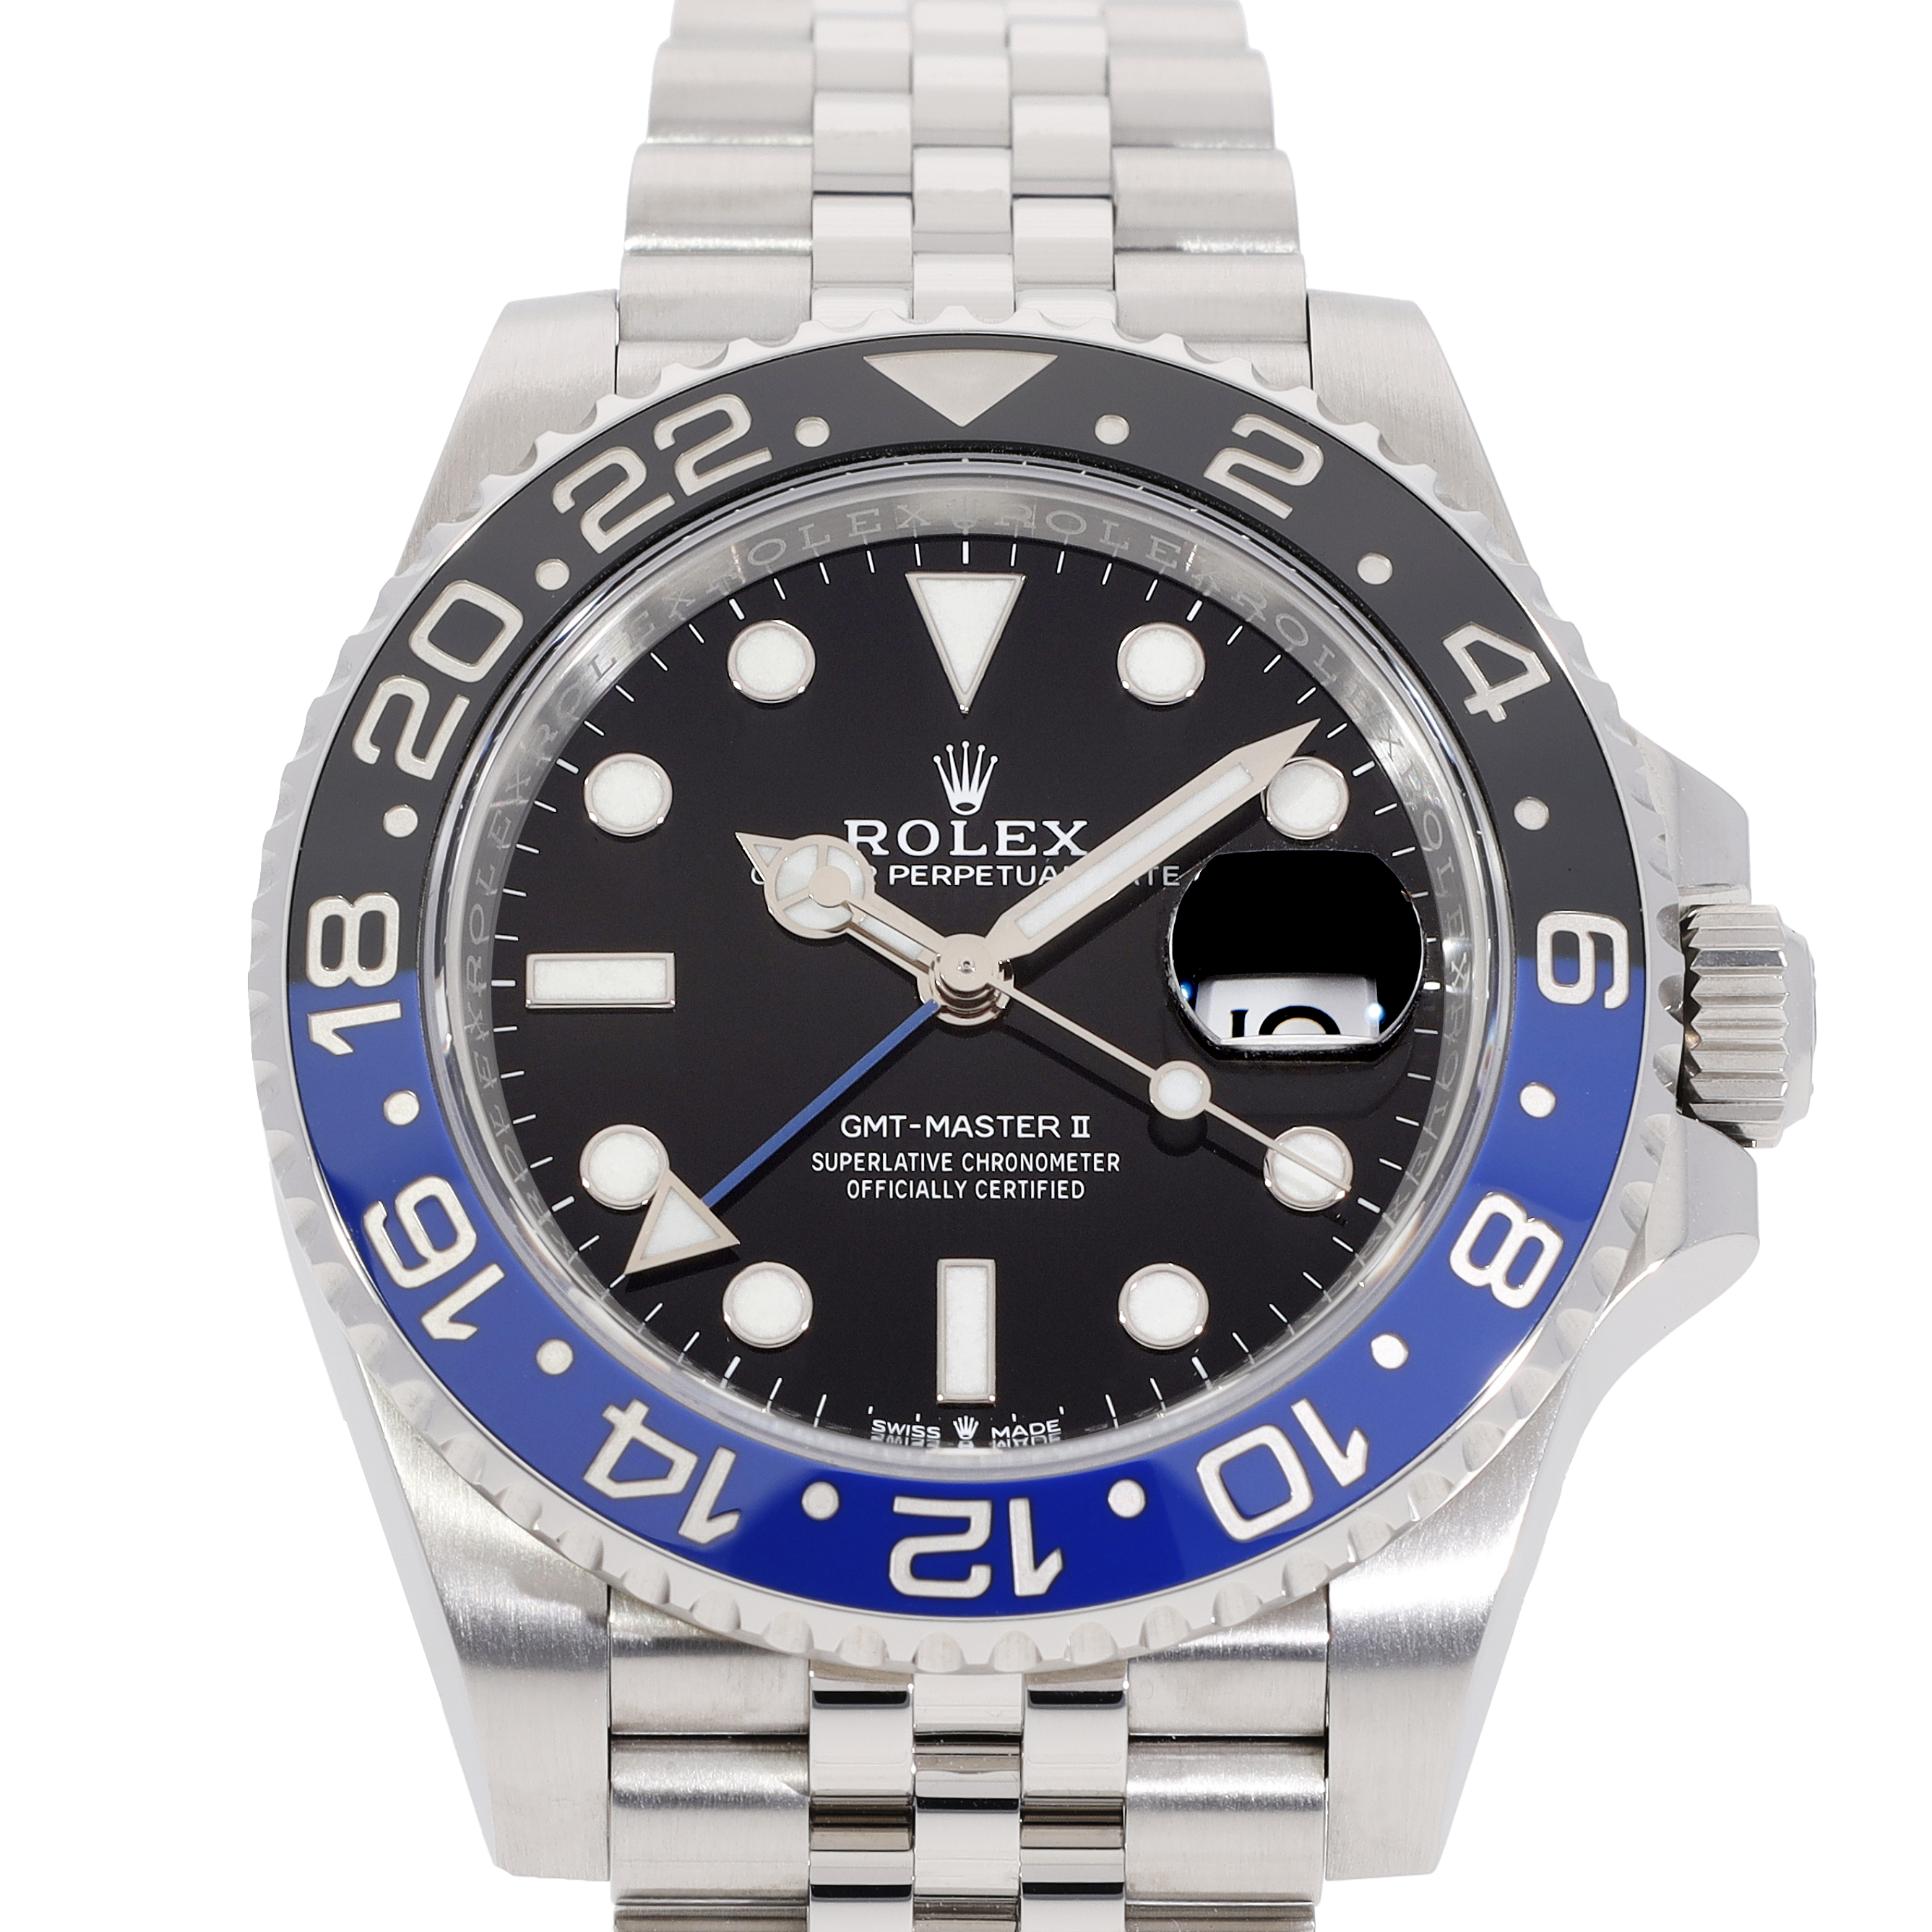 Rolex Submariner, as worn by Che Guevara! Meanwhile, Fidel Castro